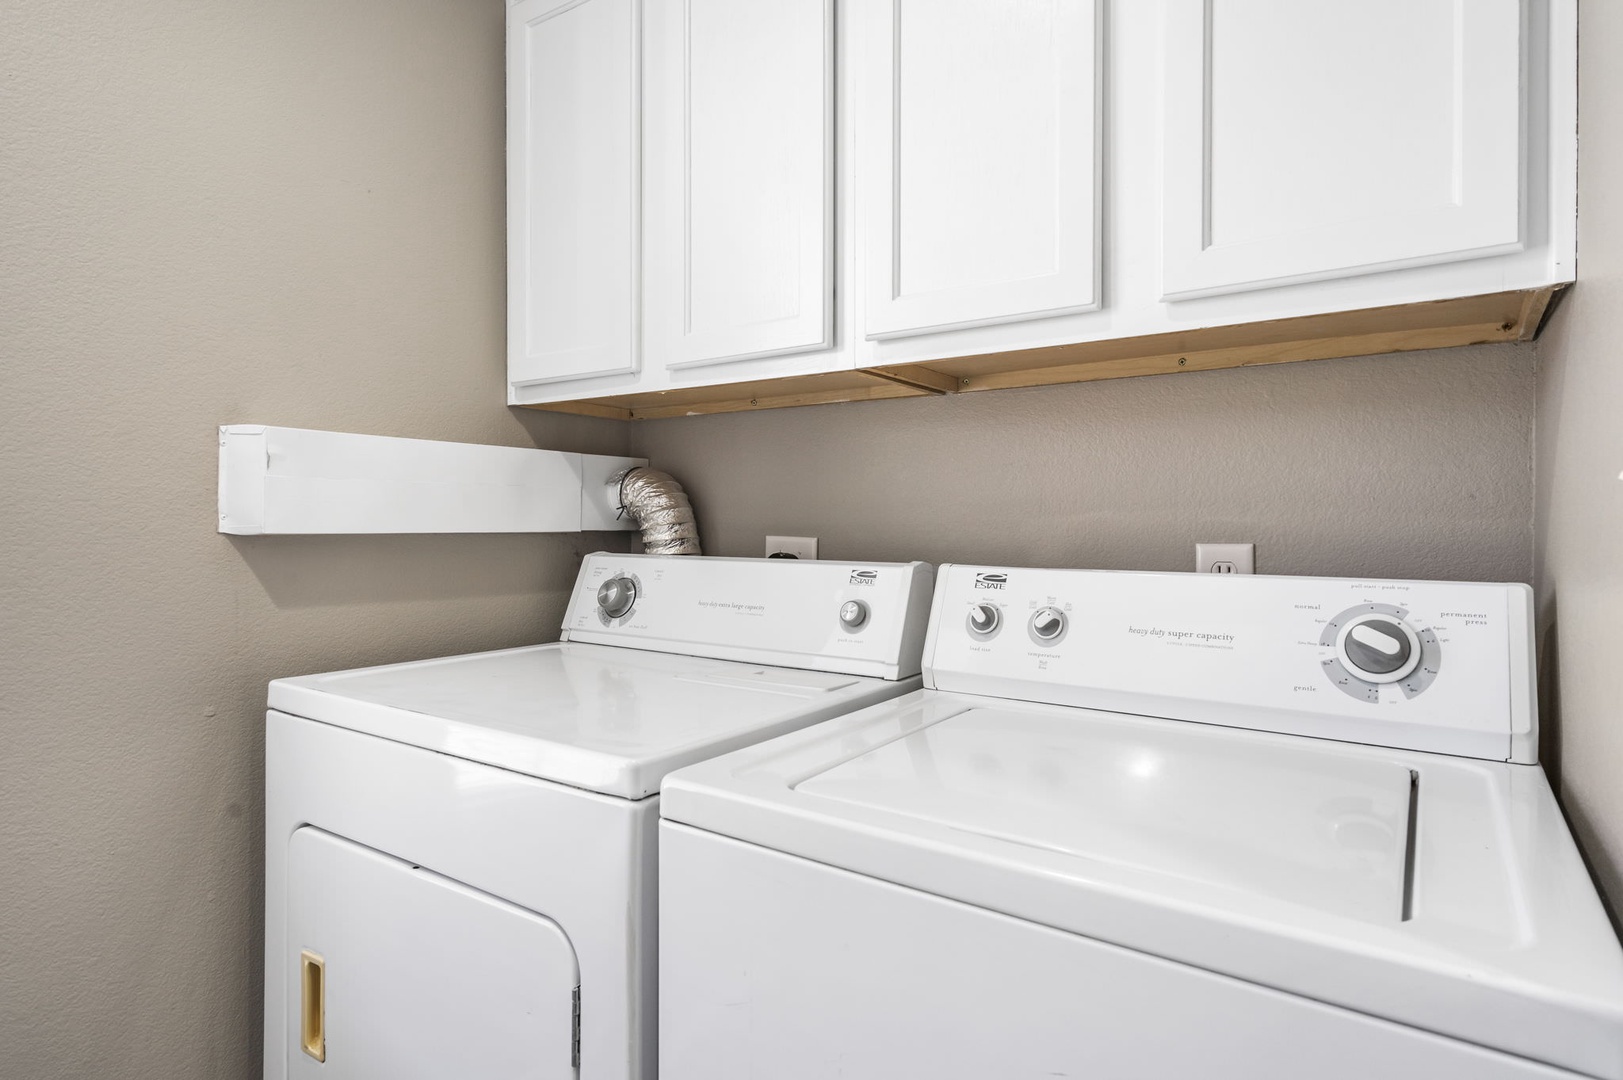 Washer and dryer area